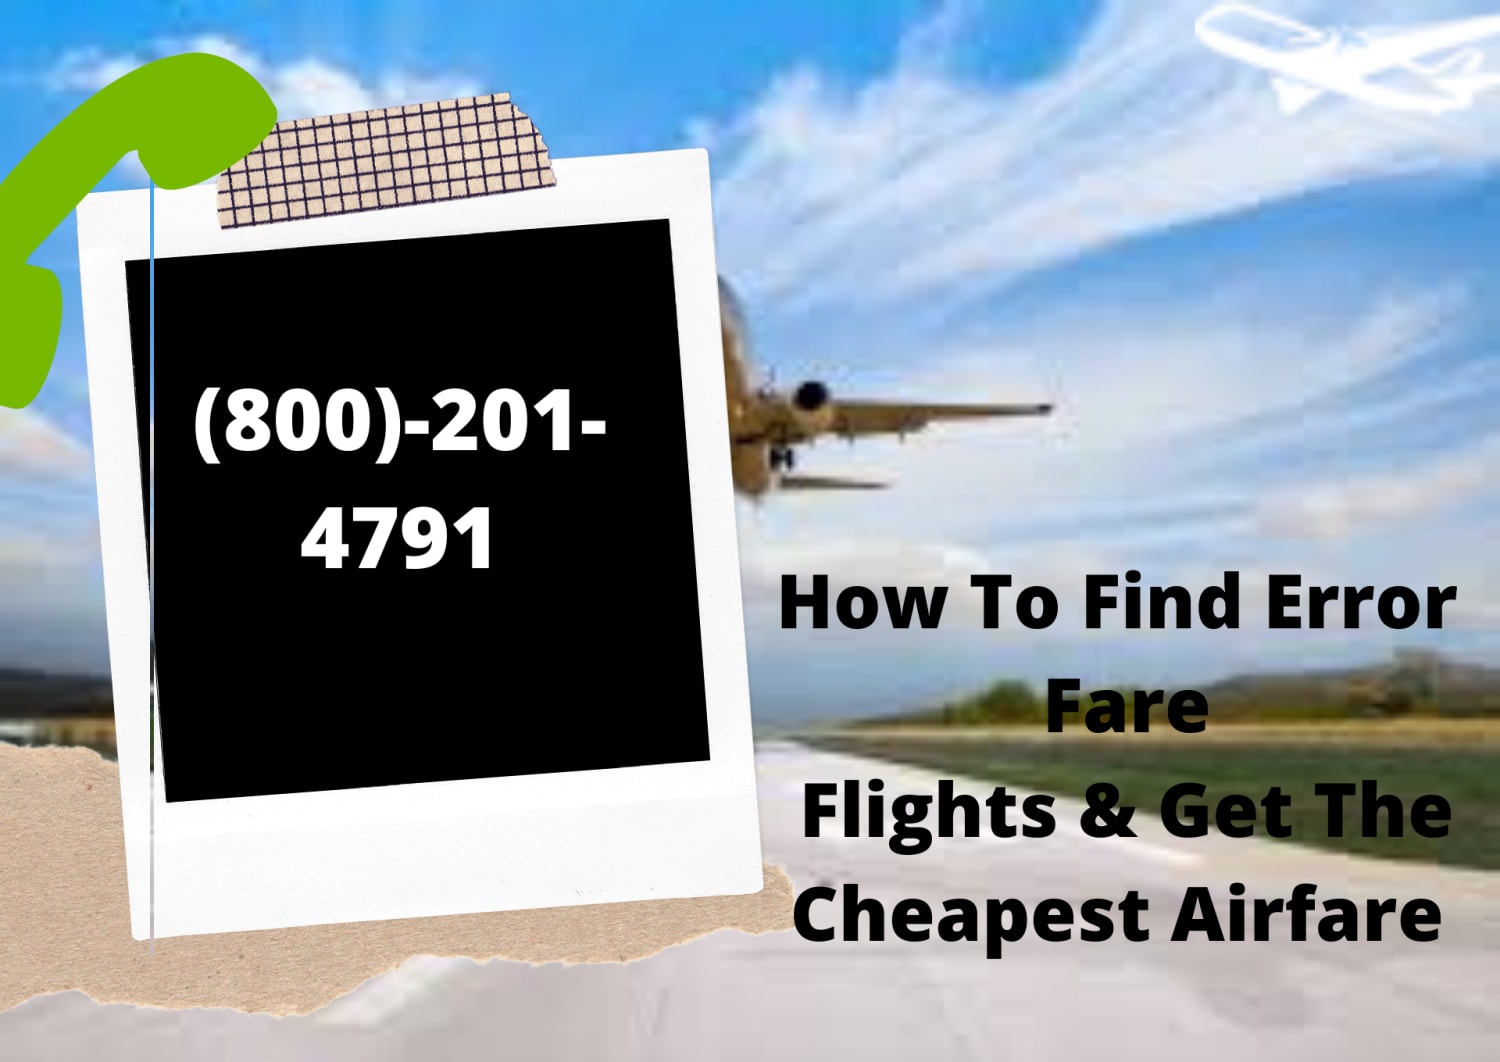 How To Find Error Fare Flights and Get The Cheapest Airfare: